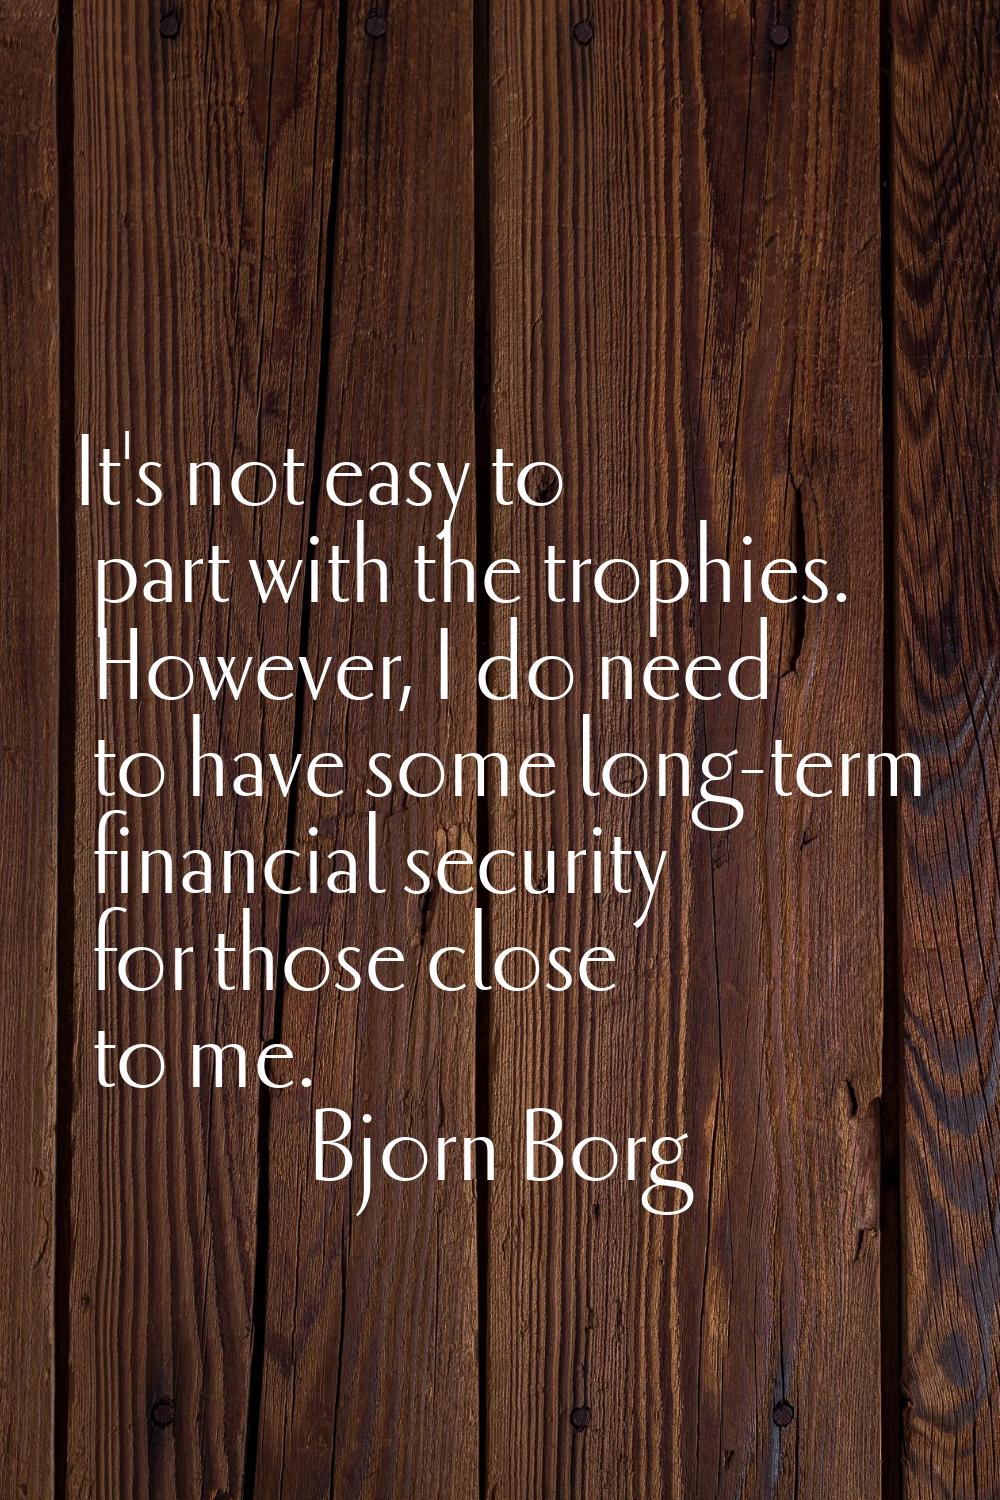 It's not easy to part with the trophies. However, I do need to have some long-term financial securi